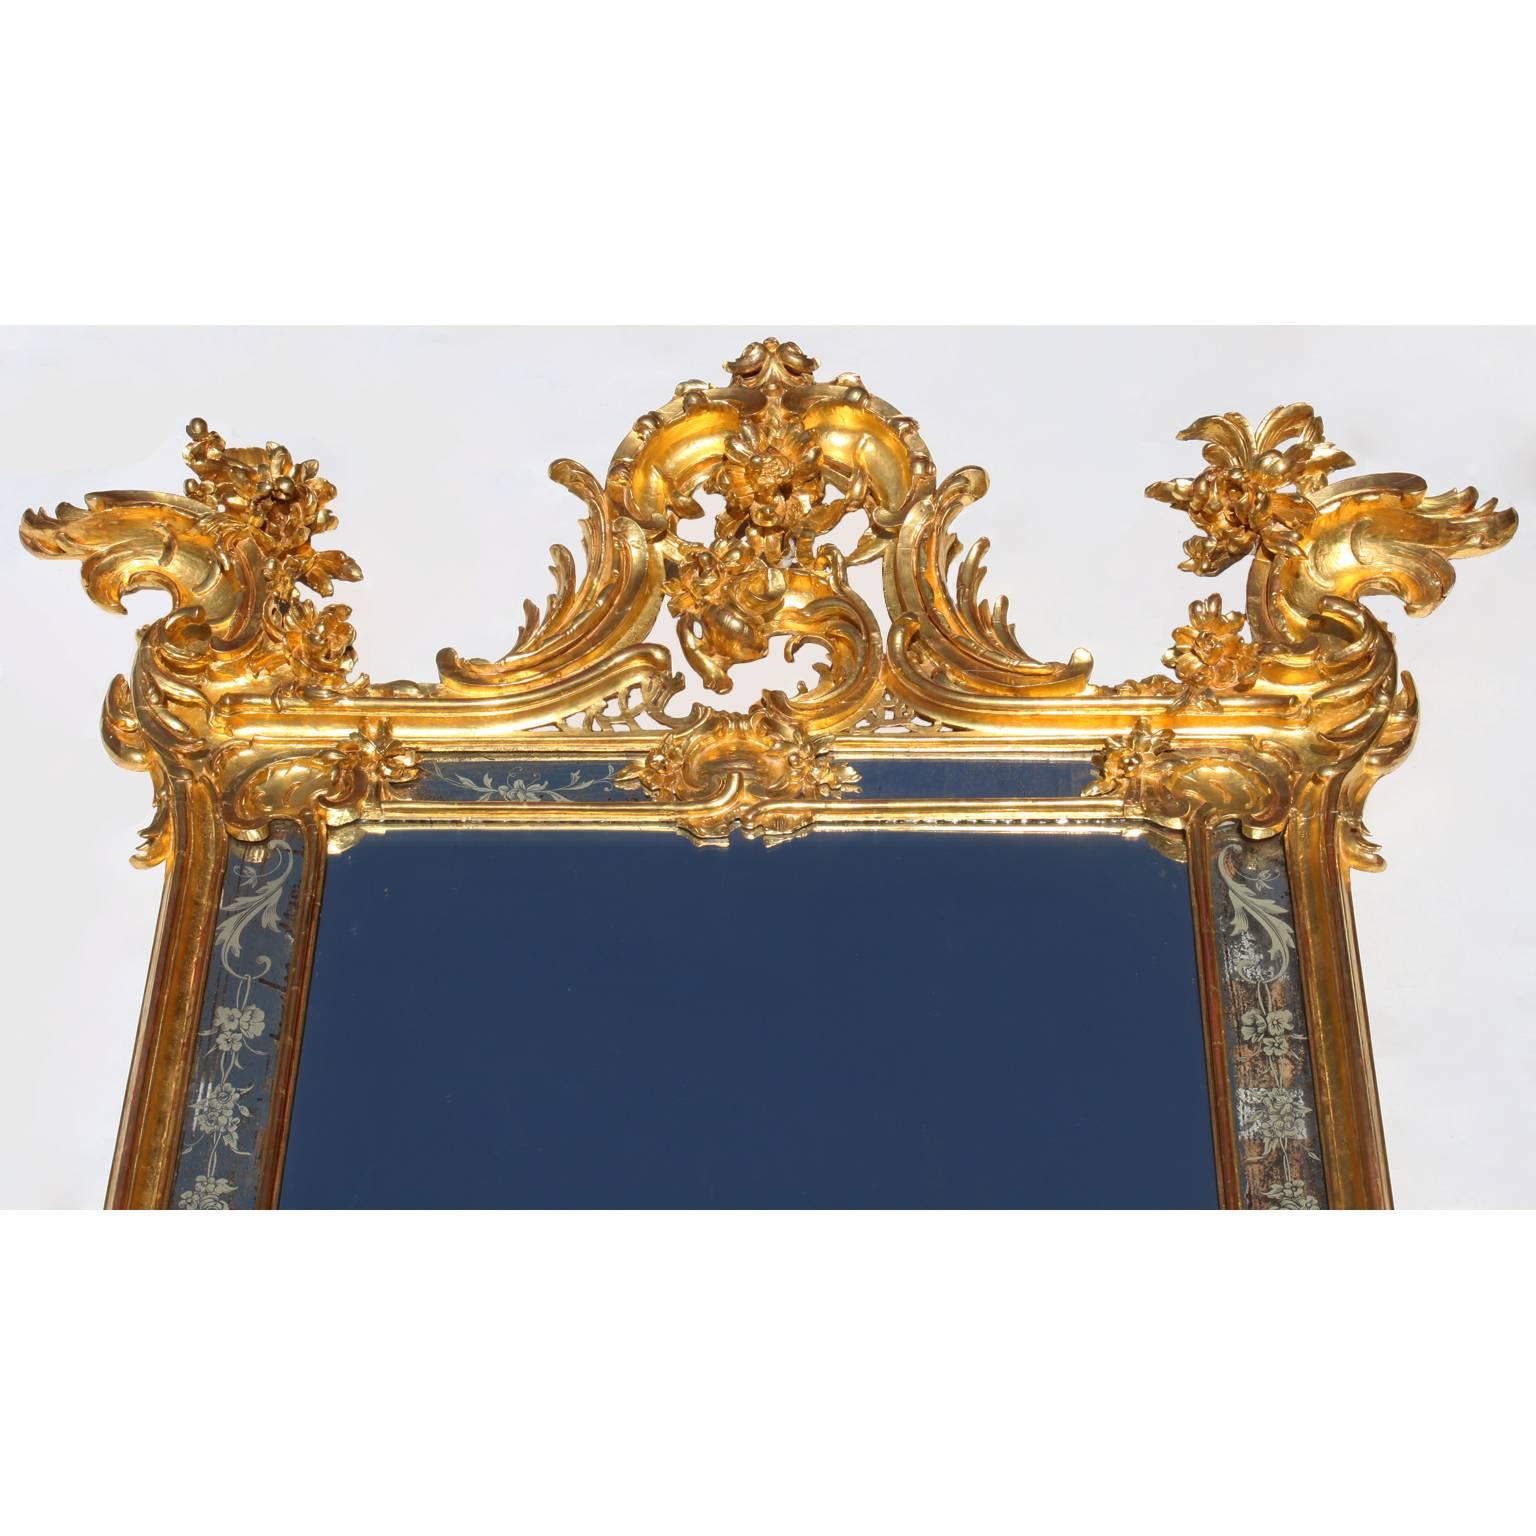 Very Fine Pair of French 19th Century Rococo Style Giltwood Carved Pier Mirrors For Sale 3